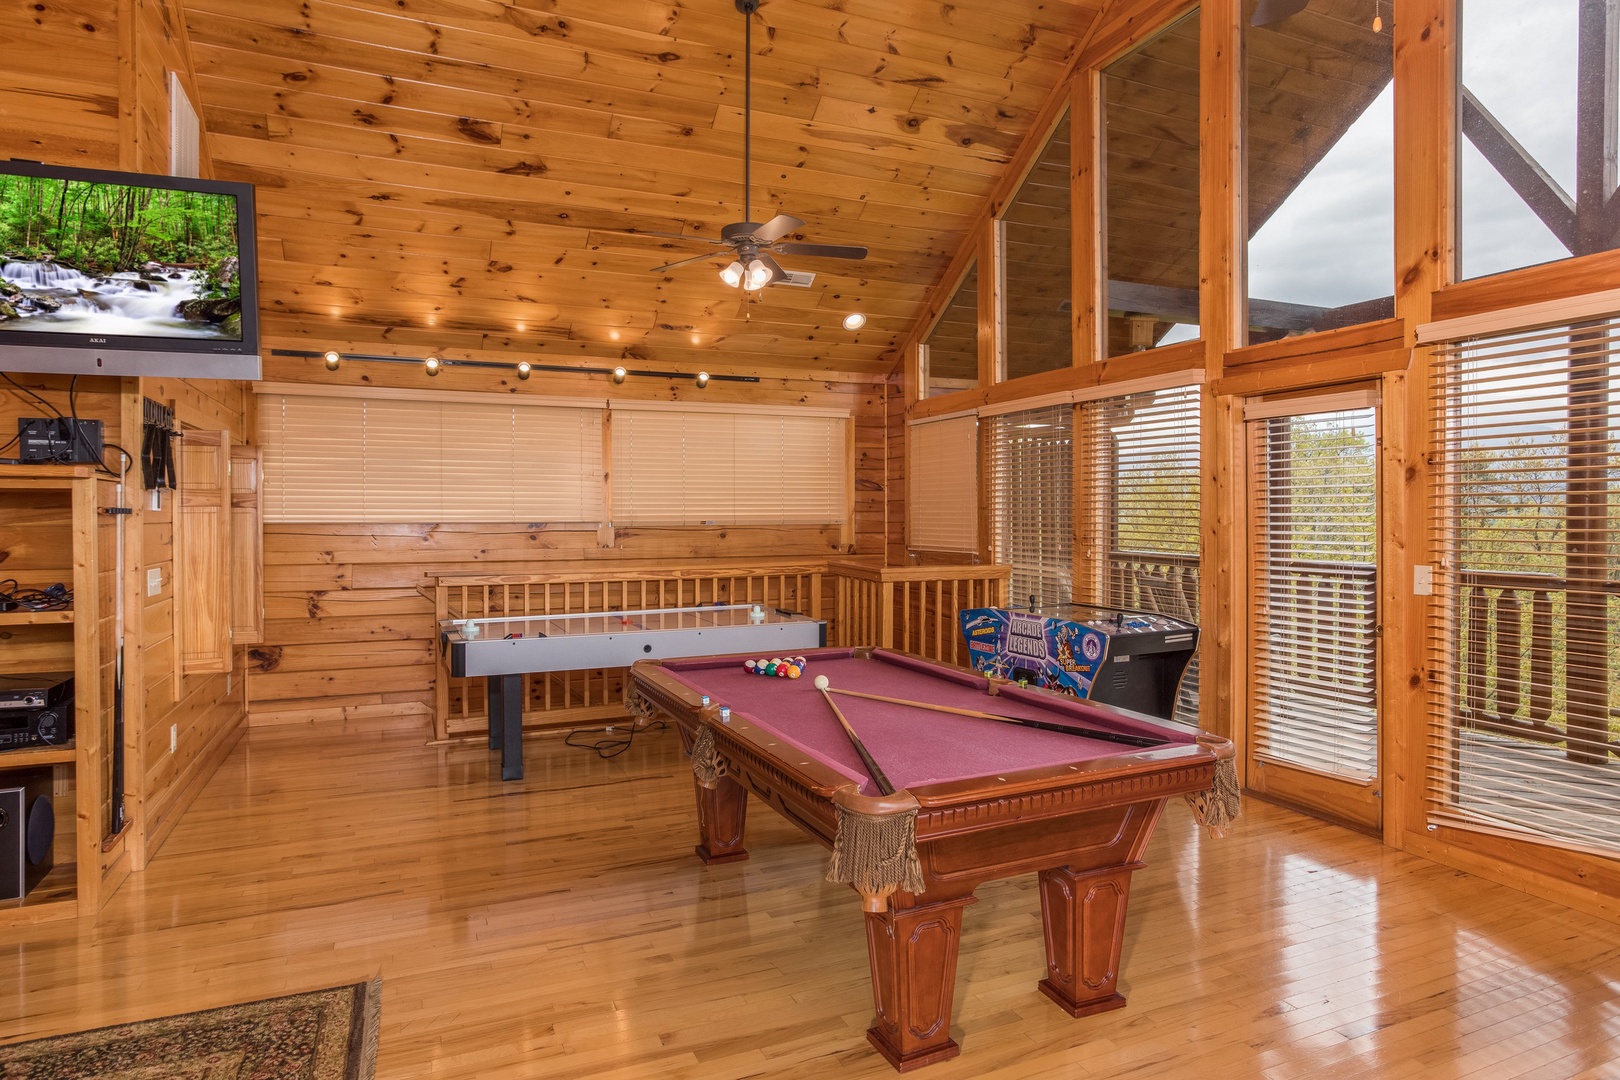 Pool table in the loft space at Howlin' in the Smokies, a 2 bedroom cabin rental located in Pigeon Forge